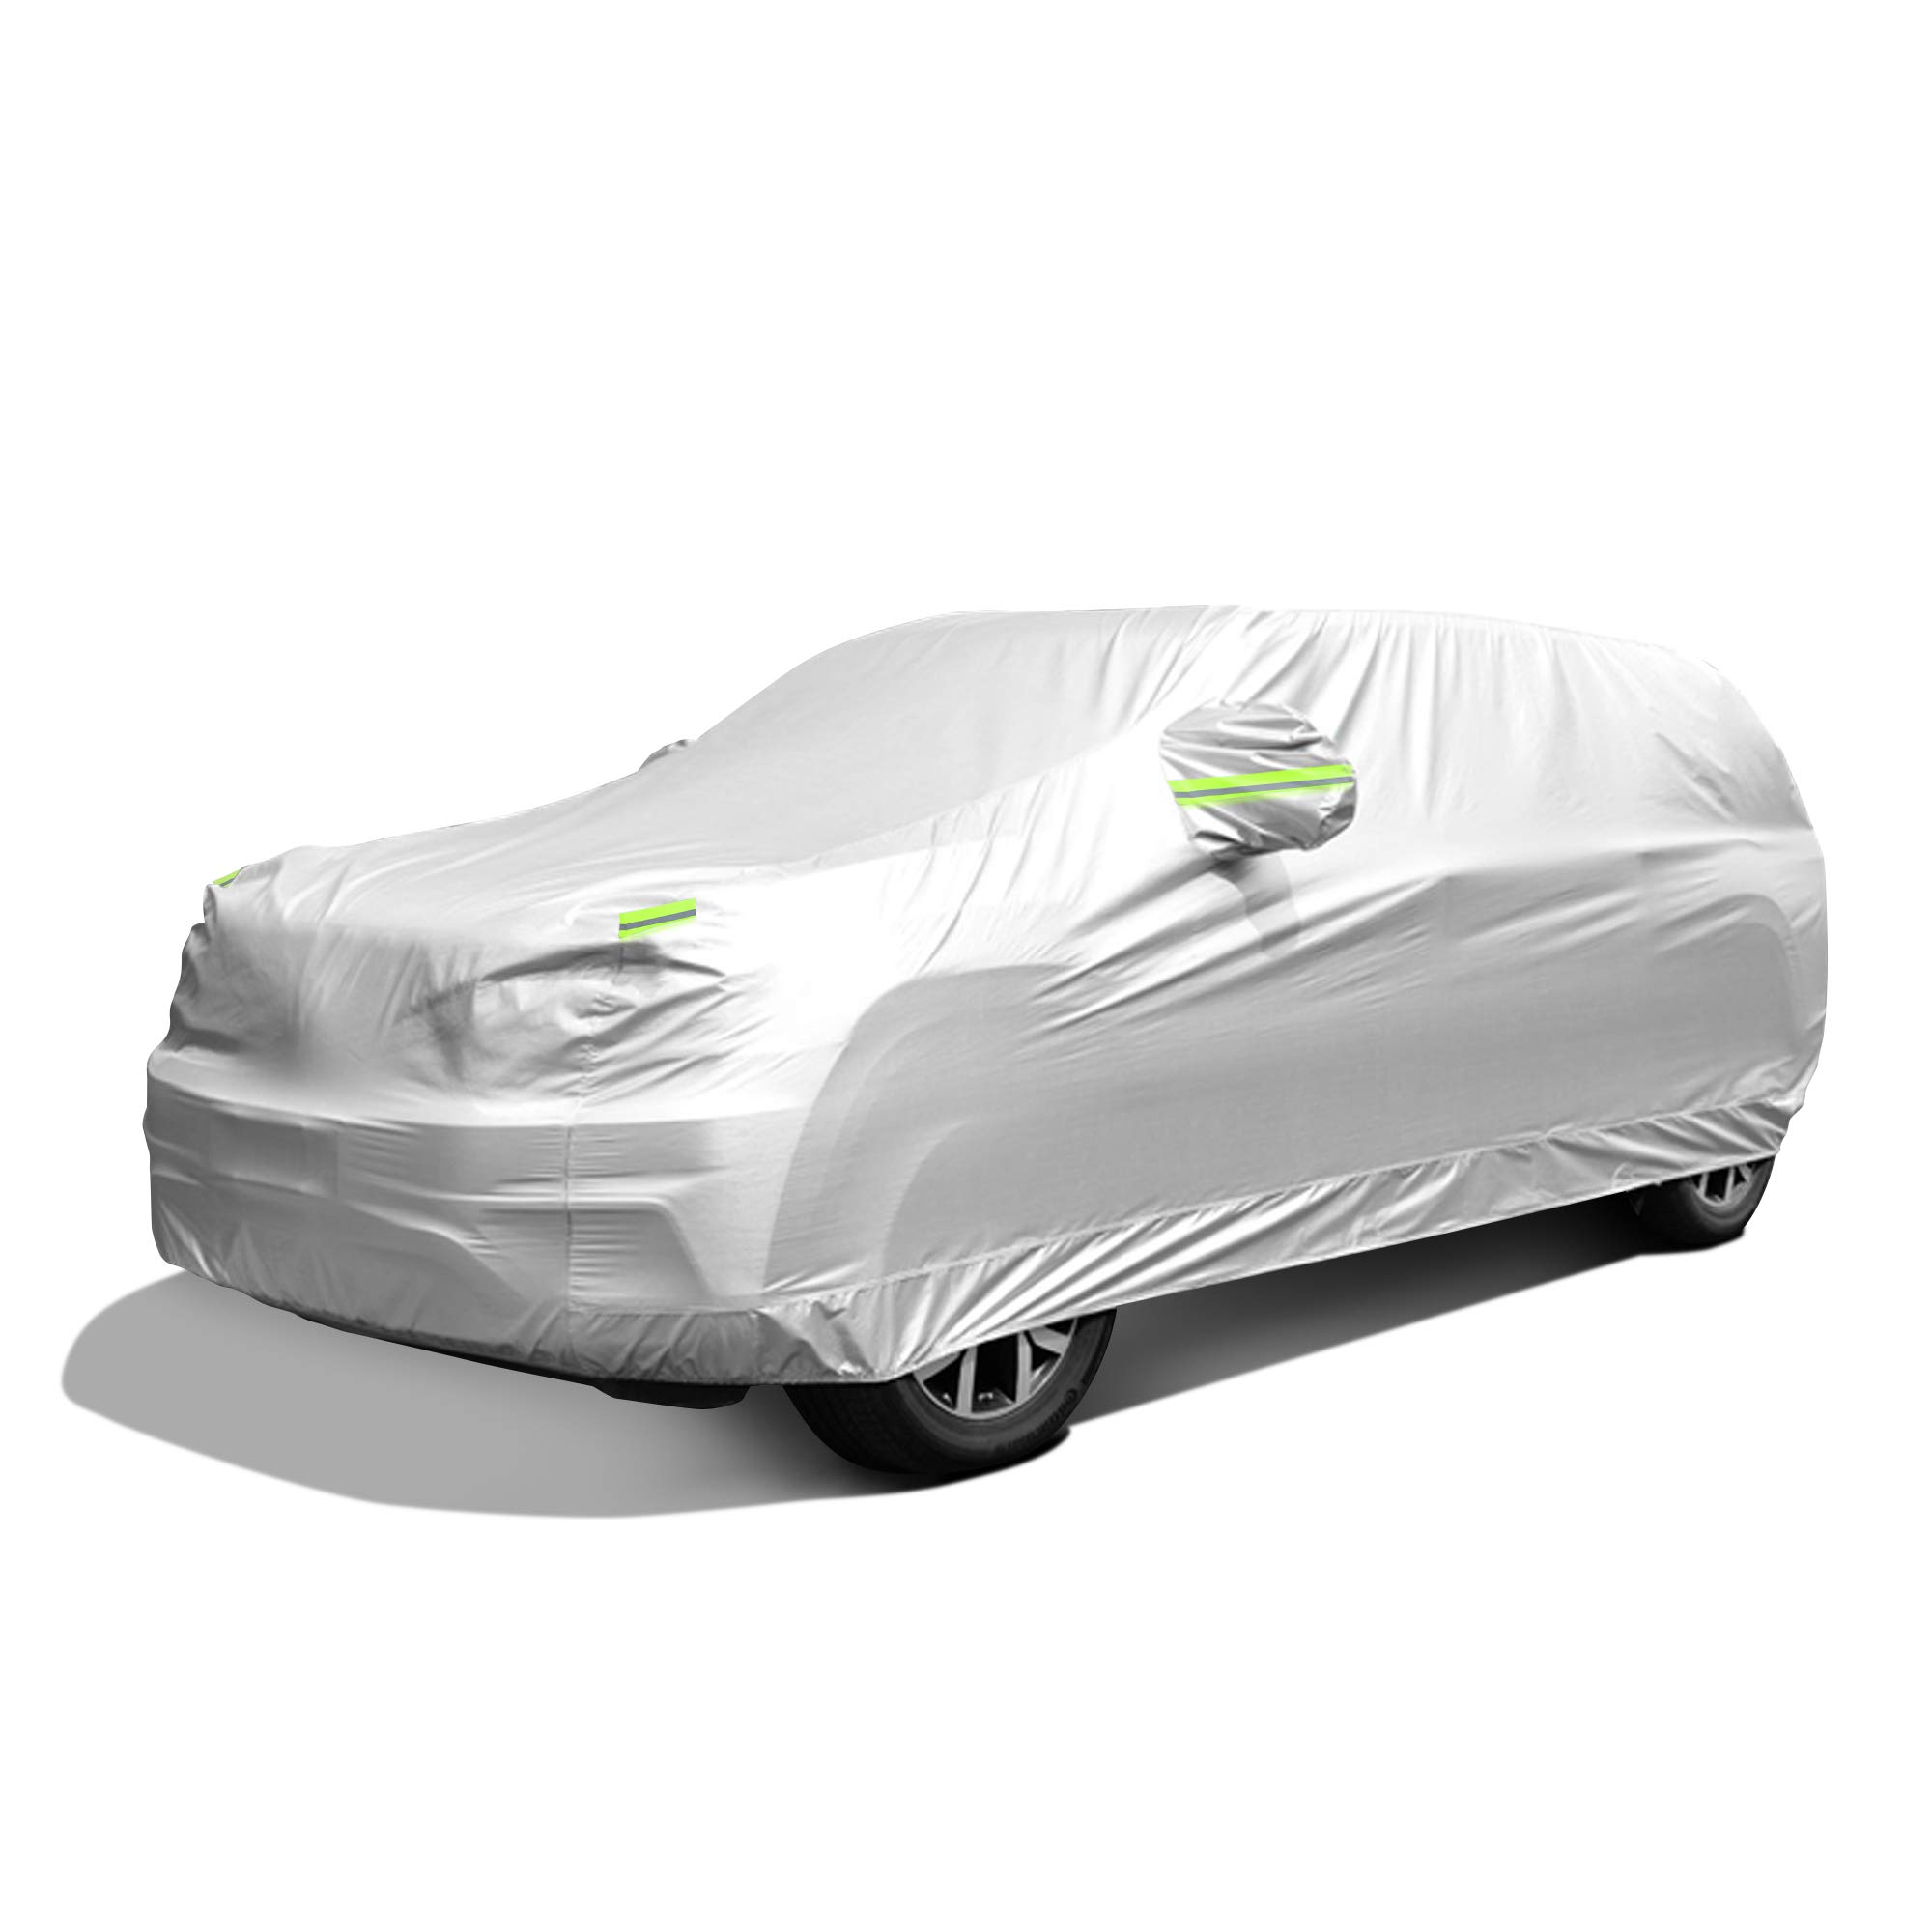 gORDITA car cover, SUV Waterproof car covers for Automobiles All Weather Season UV Protection Snowproof Full car cover, Outdoor 